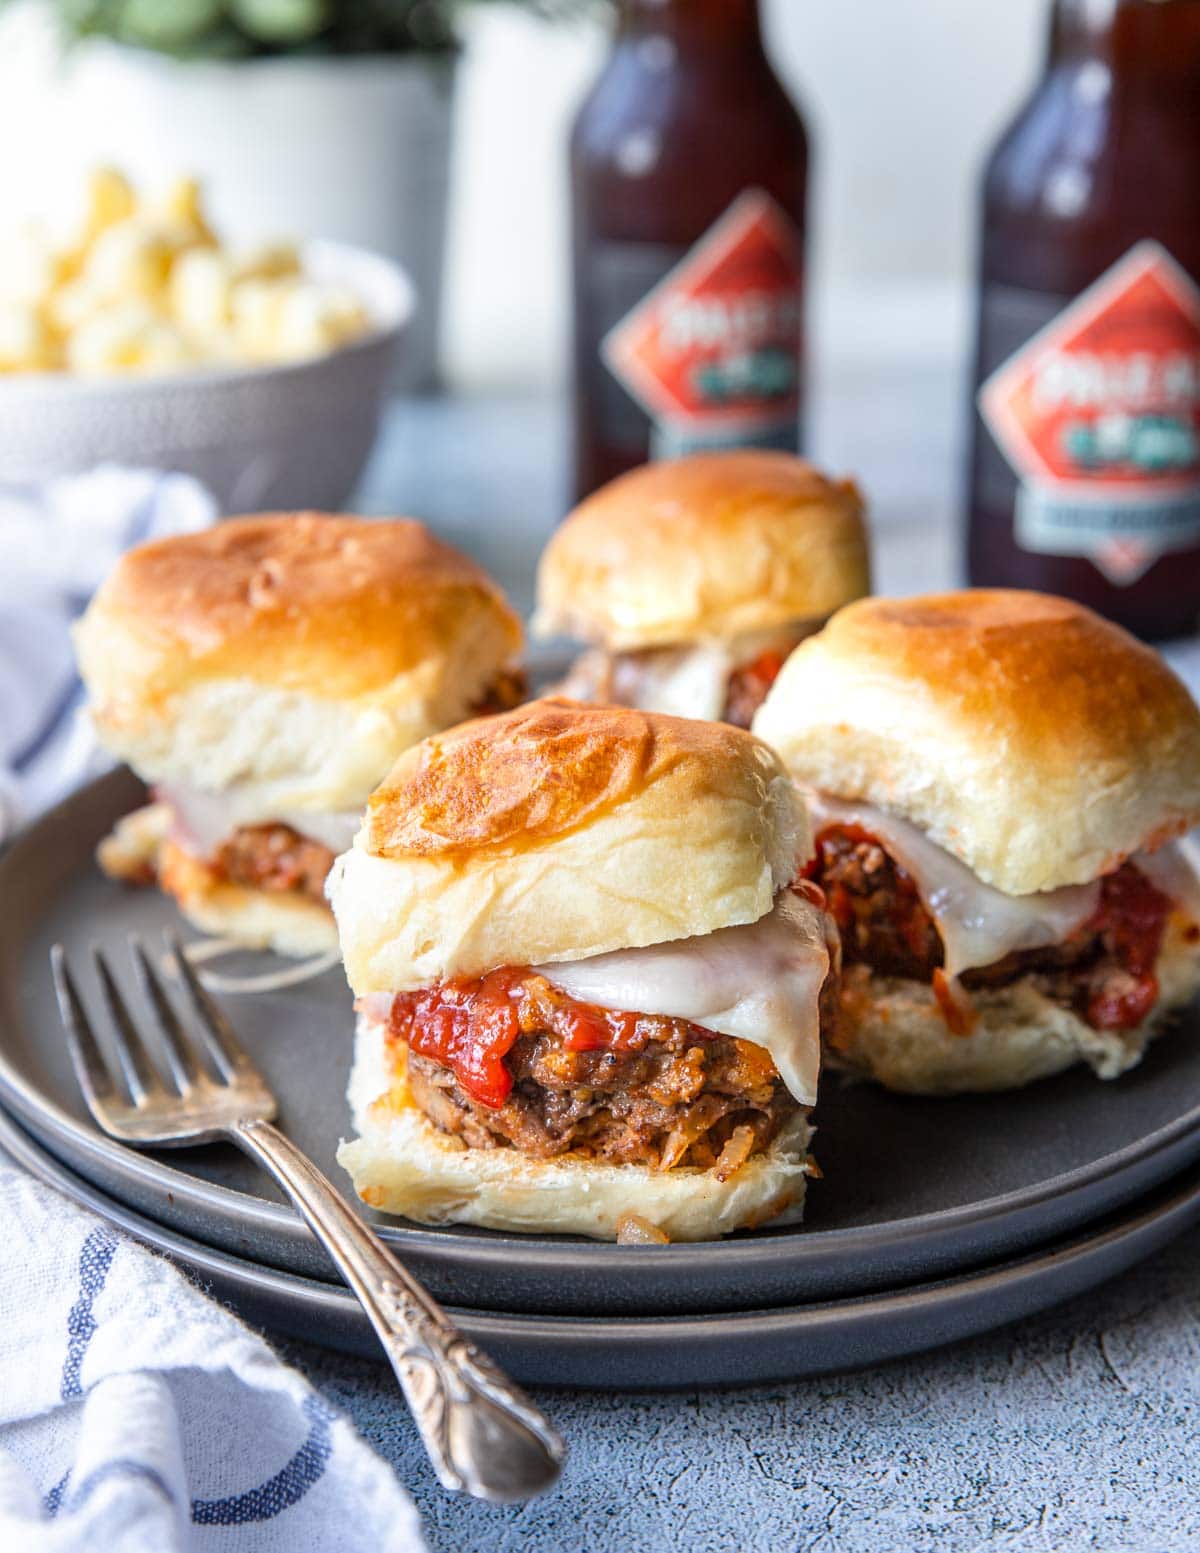 4 meatloaf slider sandwiches on a plate